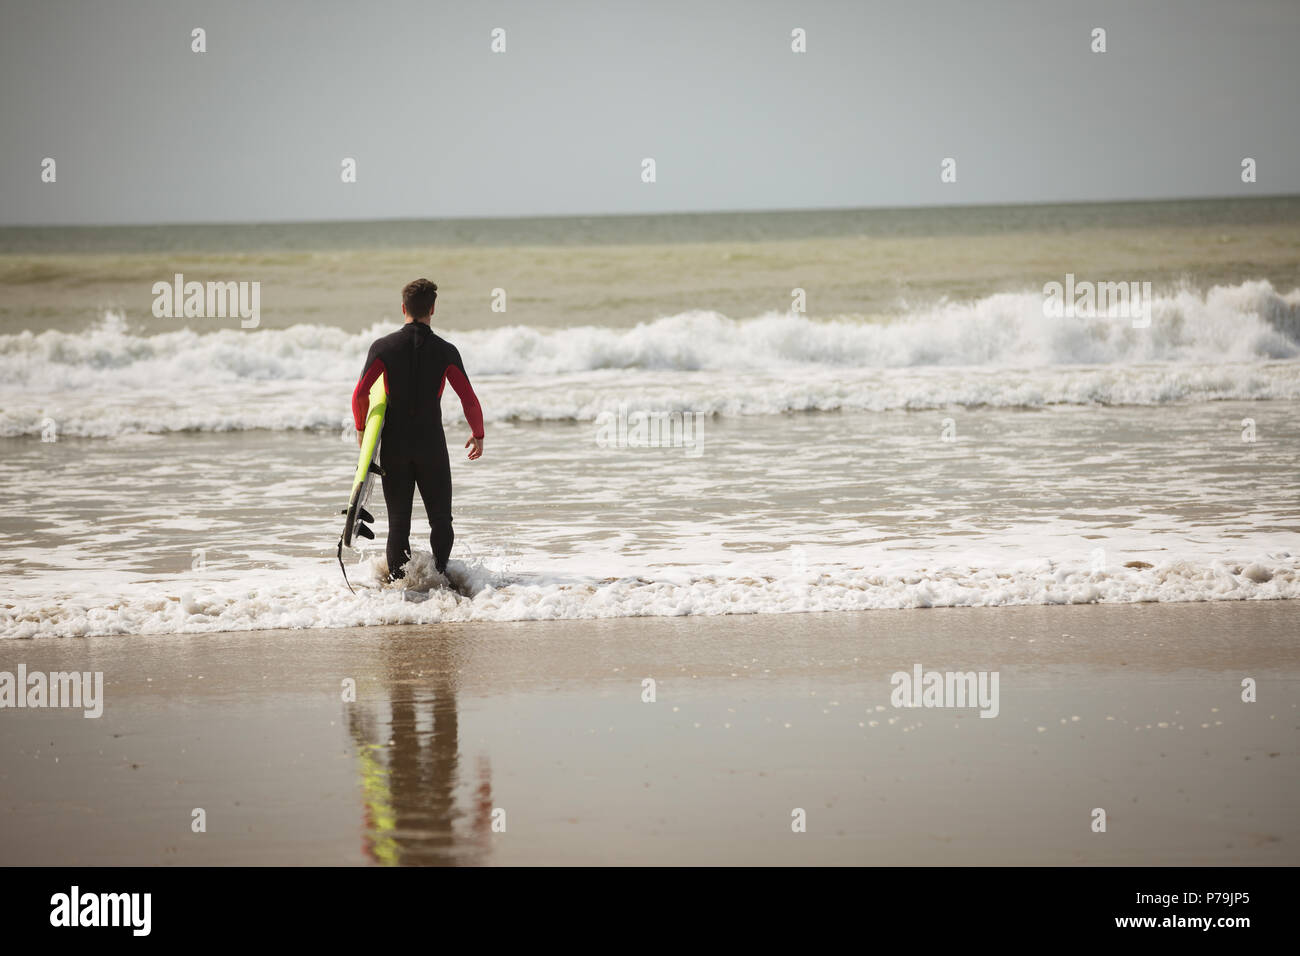 Surfer with surfboard looking at the sea from beach Stock Photo